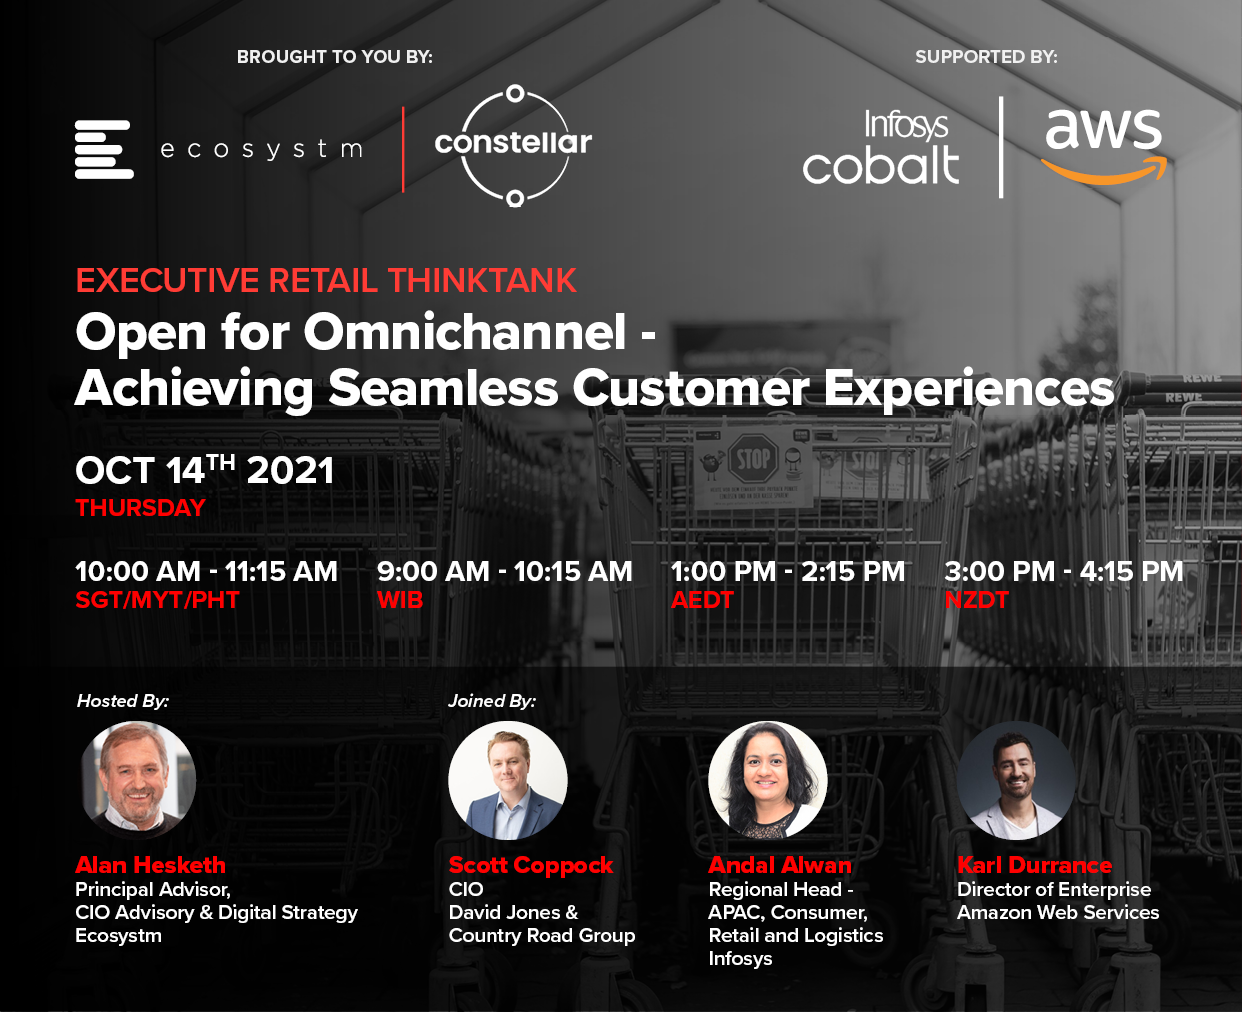 Executive Retail ThinkTank Open for Omnichannel - Achieving Seamless Customer Experiences